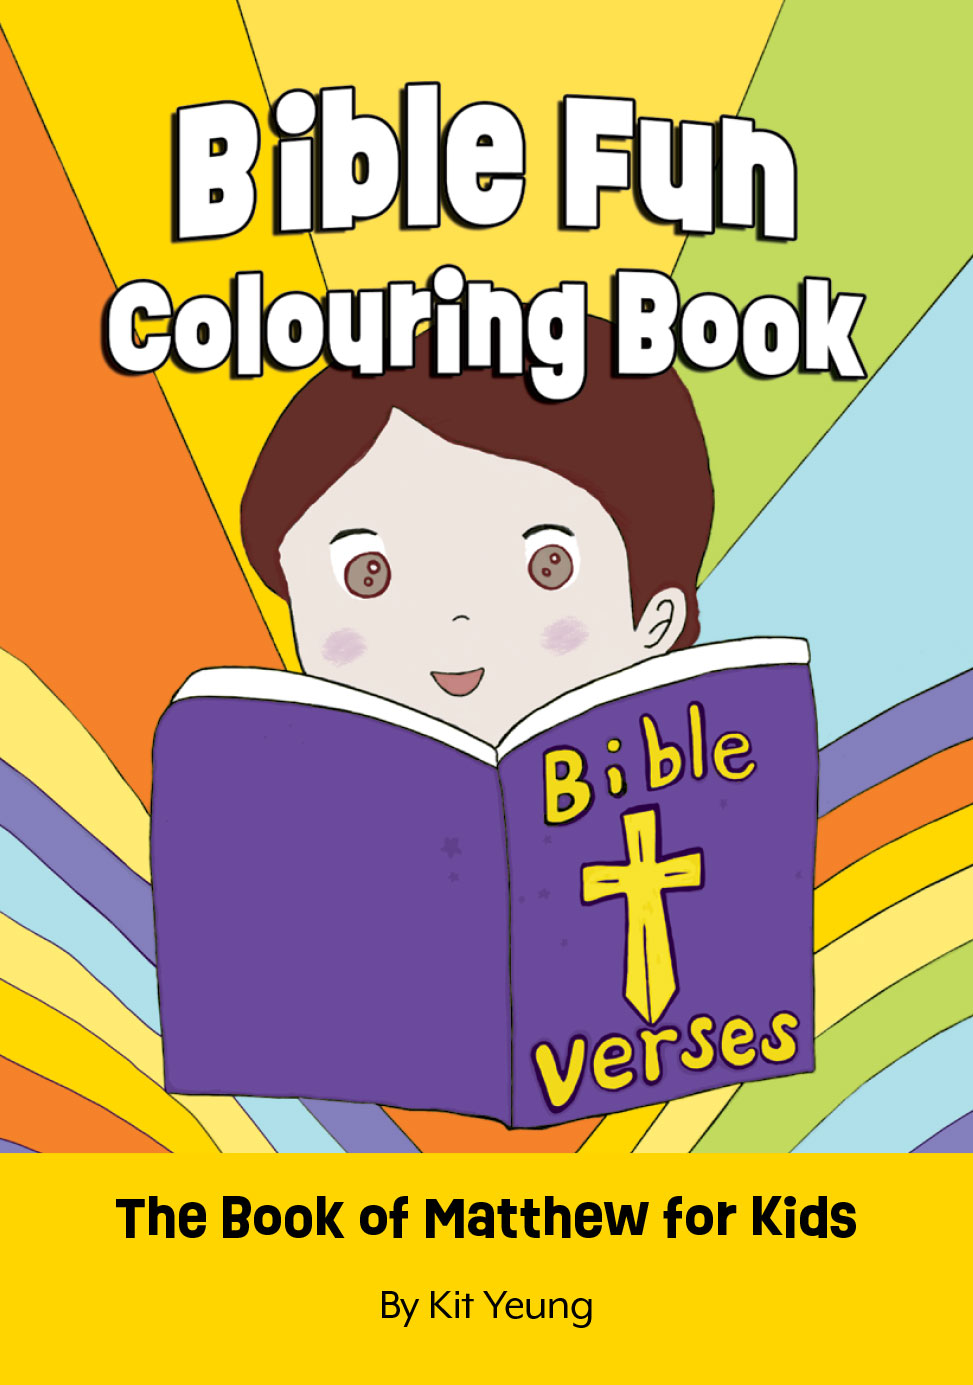 Bible Fun Colouring Book by Kit Yeung